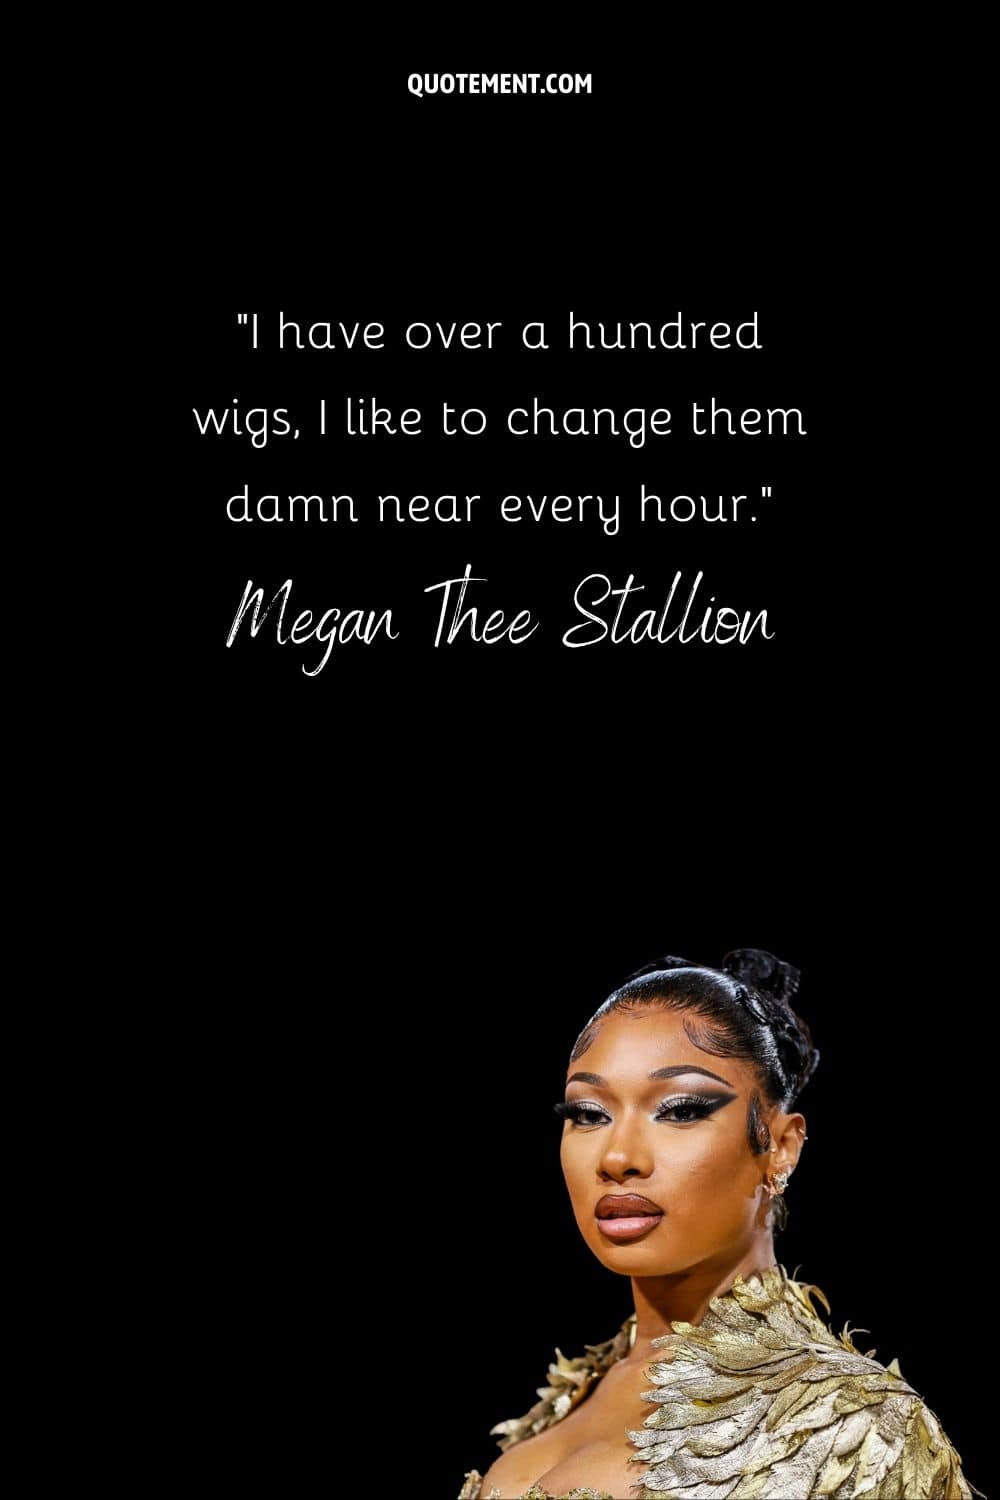 “I have over a hundred wigs, I like to change them damn near every hour.” — Megan Thee Stallion